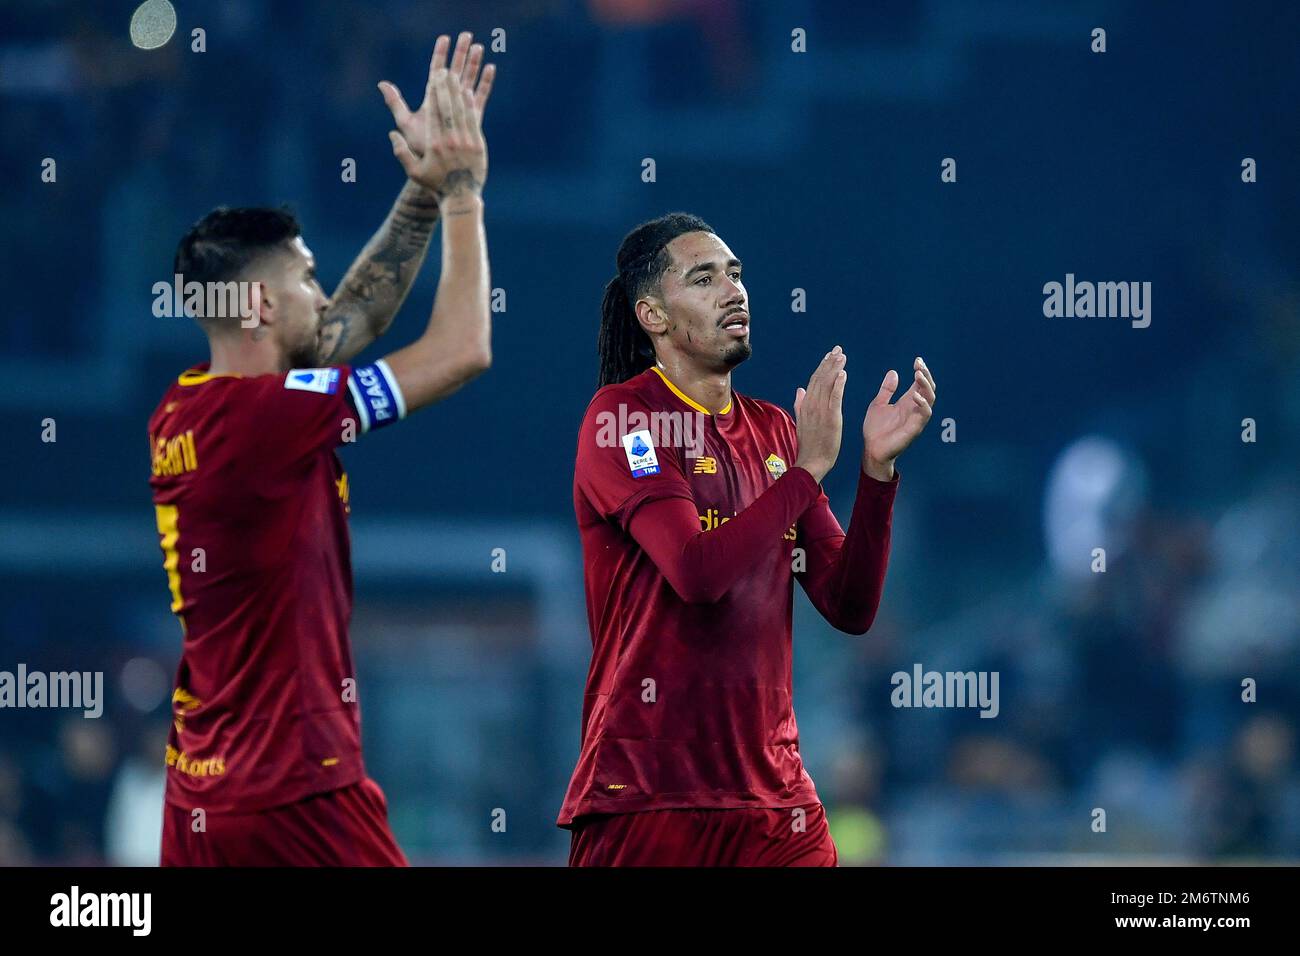 Bologna football club 1909 hi-res stock photography and images - Alamy